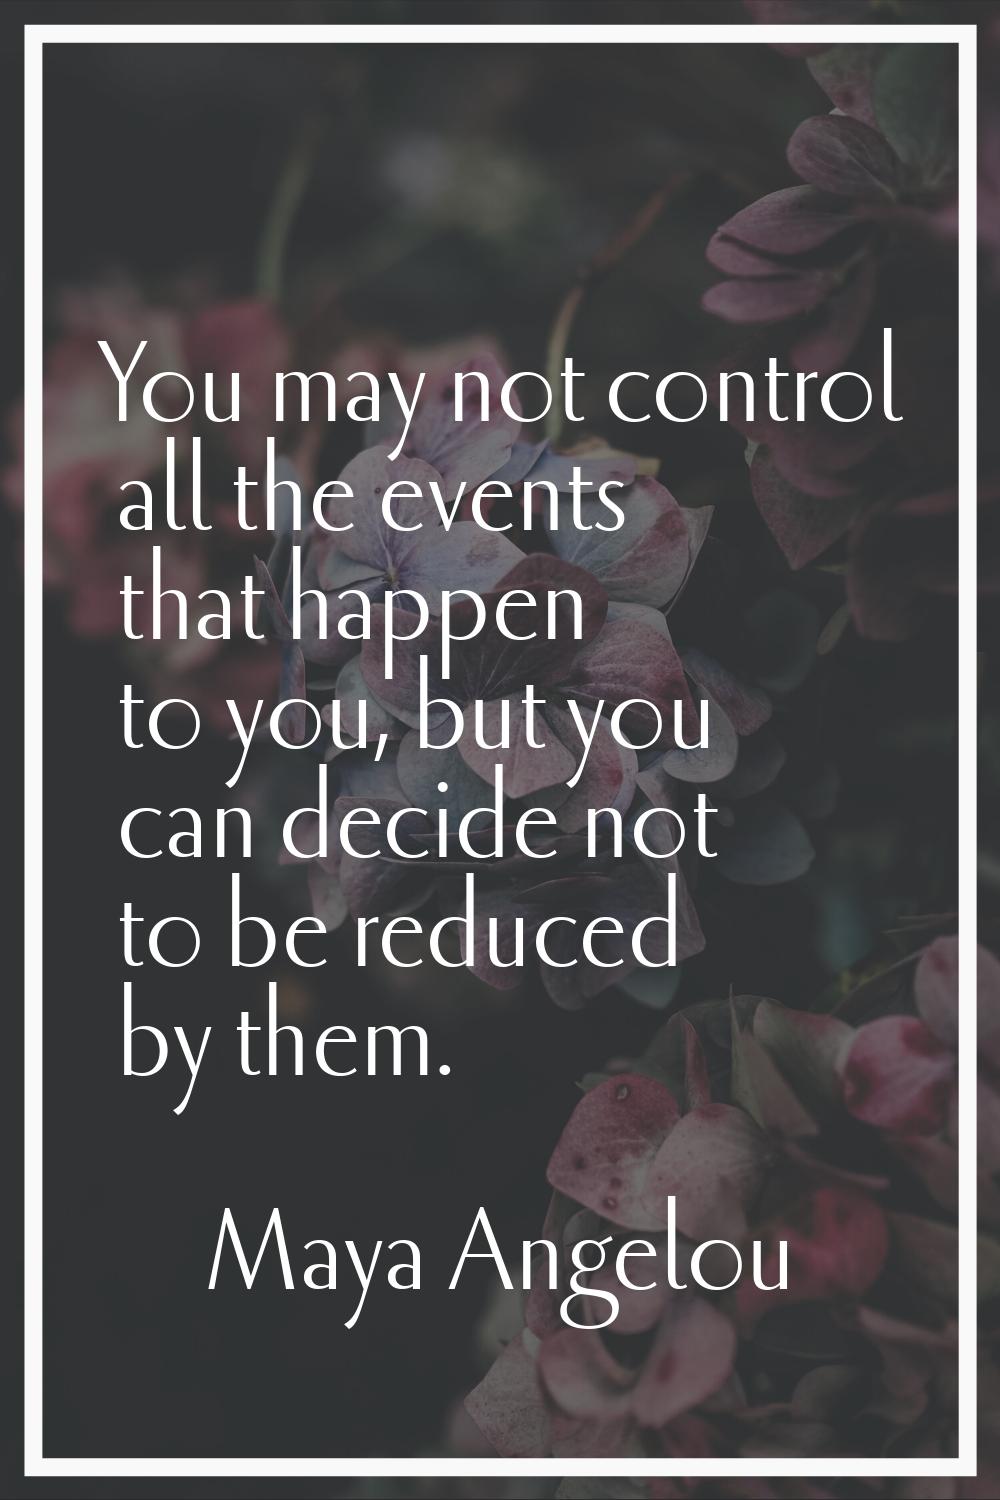 You may not control all the events that happen to you, but you can decide not to be reduced by them